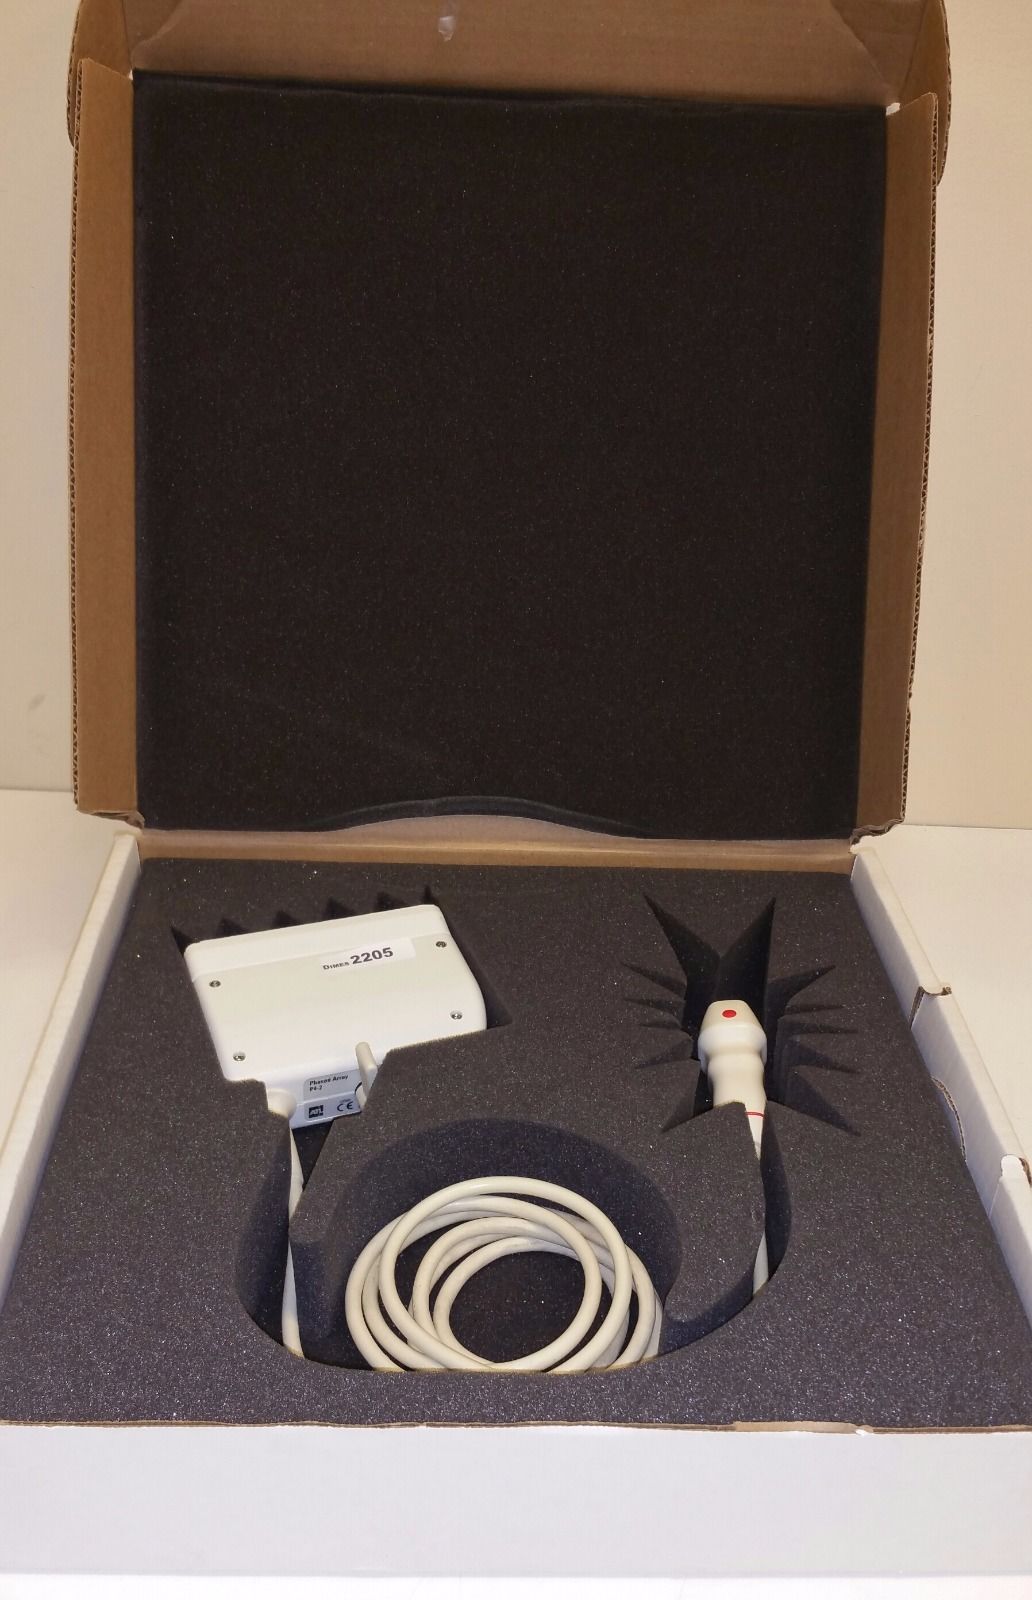 Philips ATL P4-2 Phased Array Ultrasound Transducer Probe Inv 2205